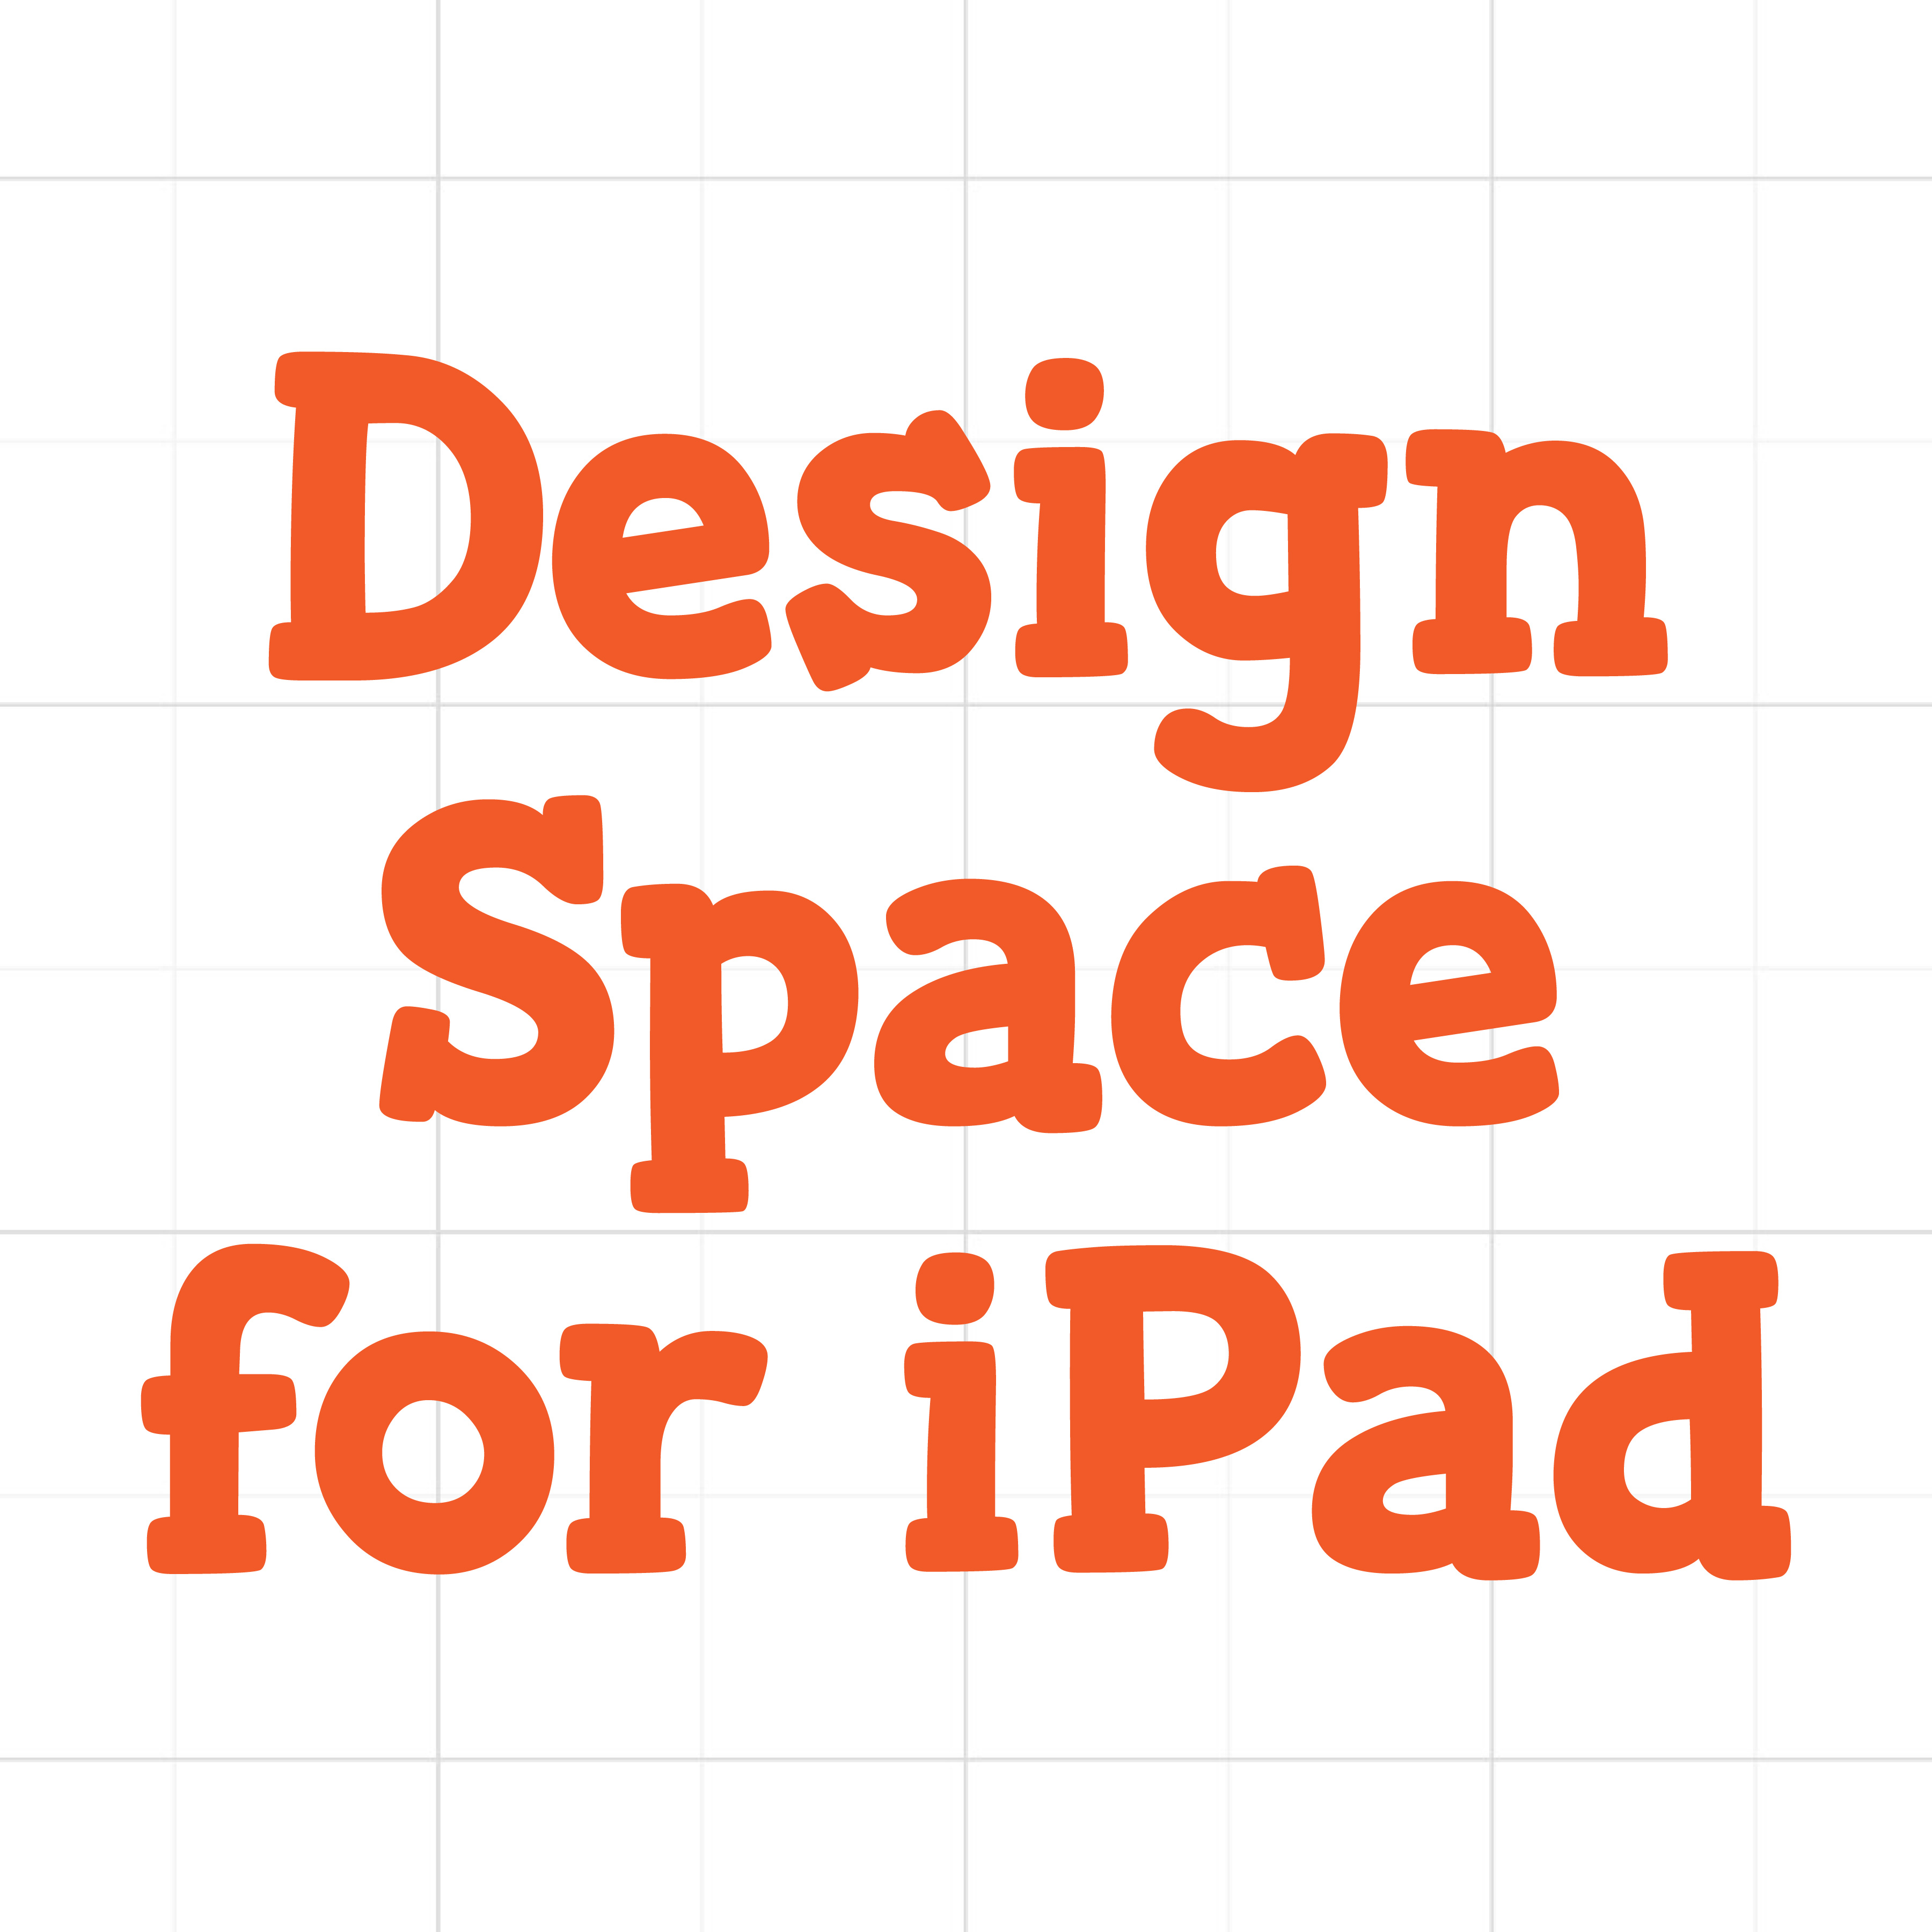 Download Design Space for iPad - SVG EPS PNG DXF Cut Files for ...